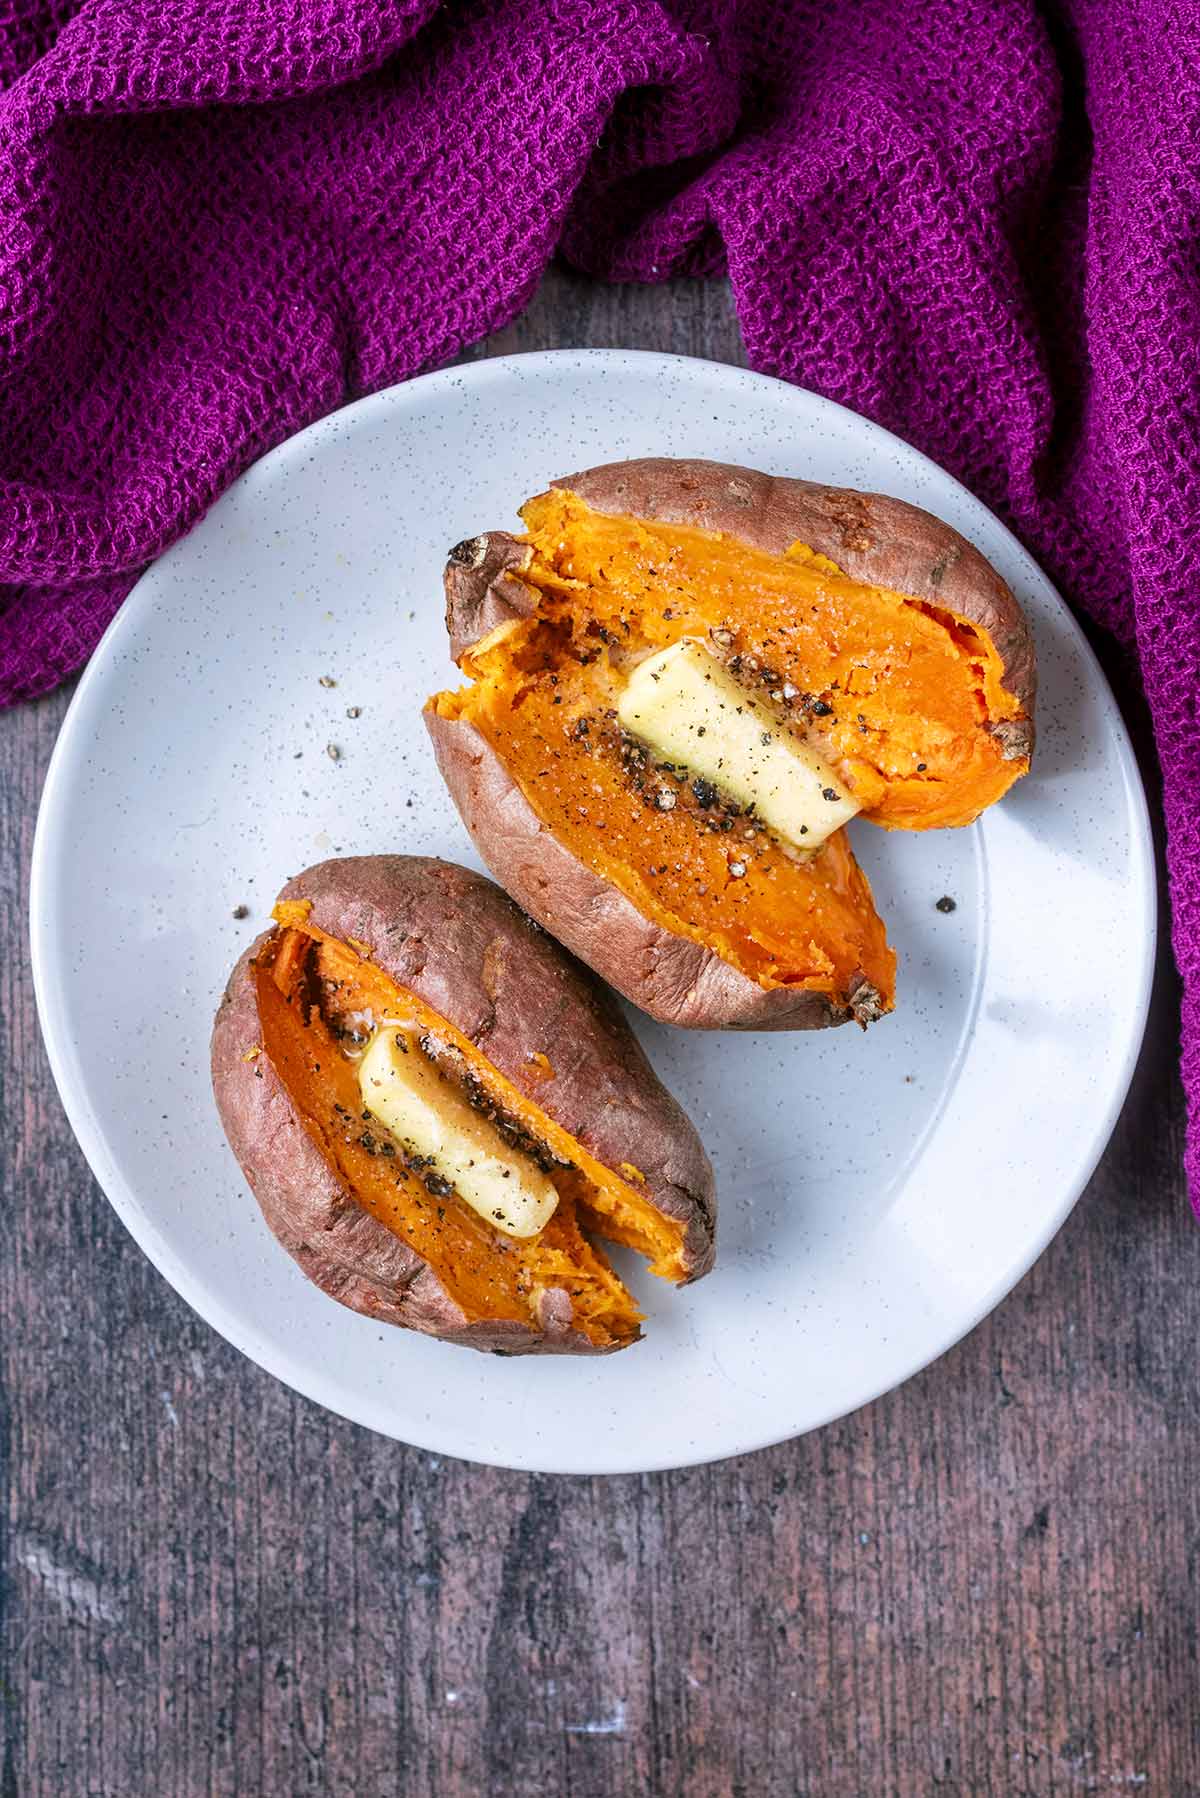 Two cooked sweet potatoes on a plate next to a purple towel.